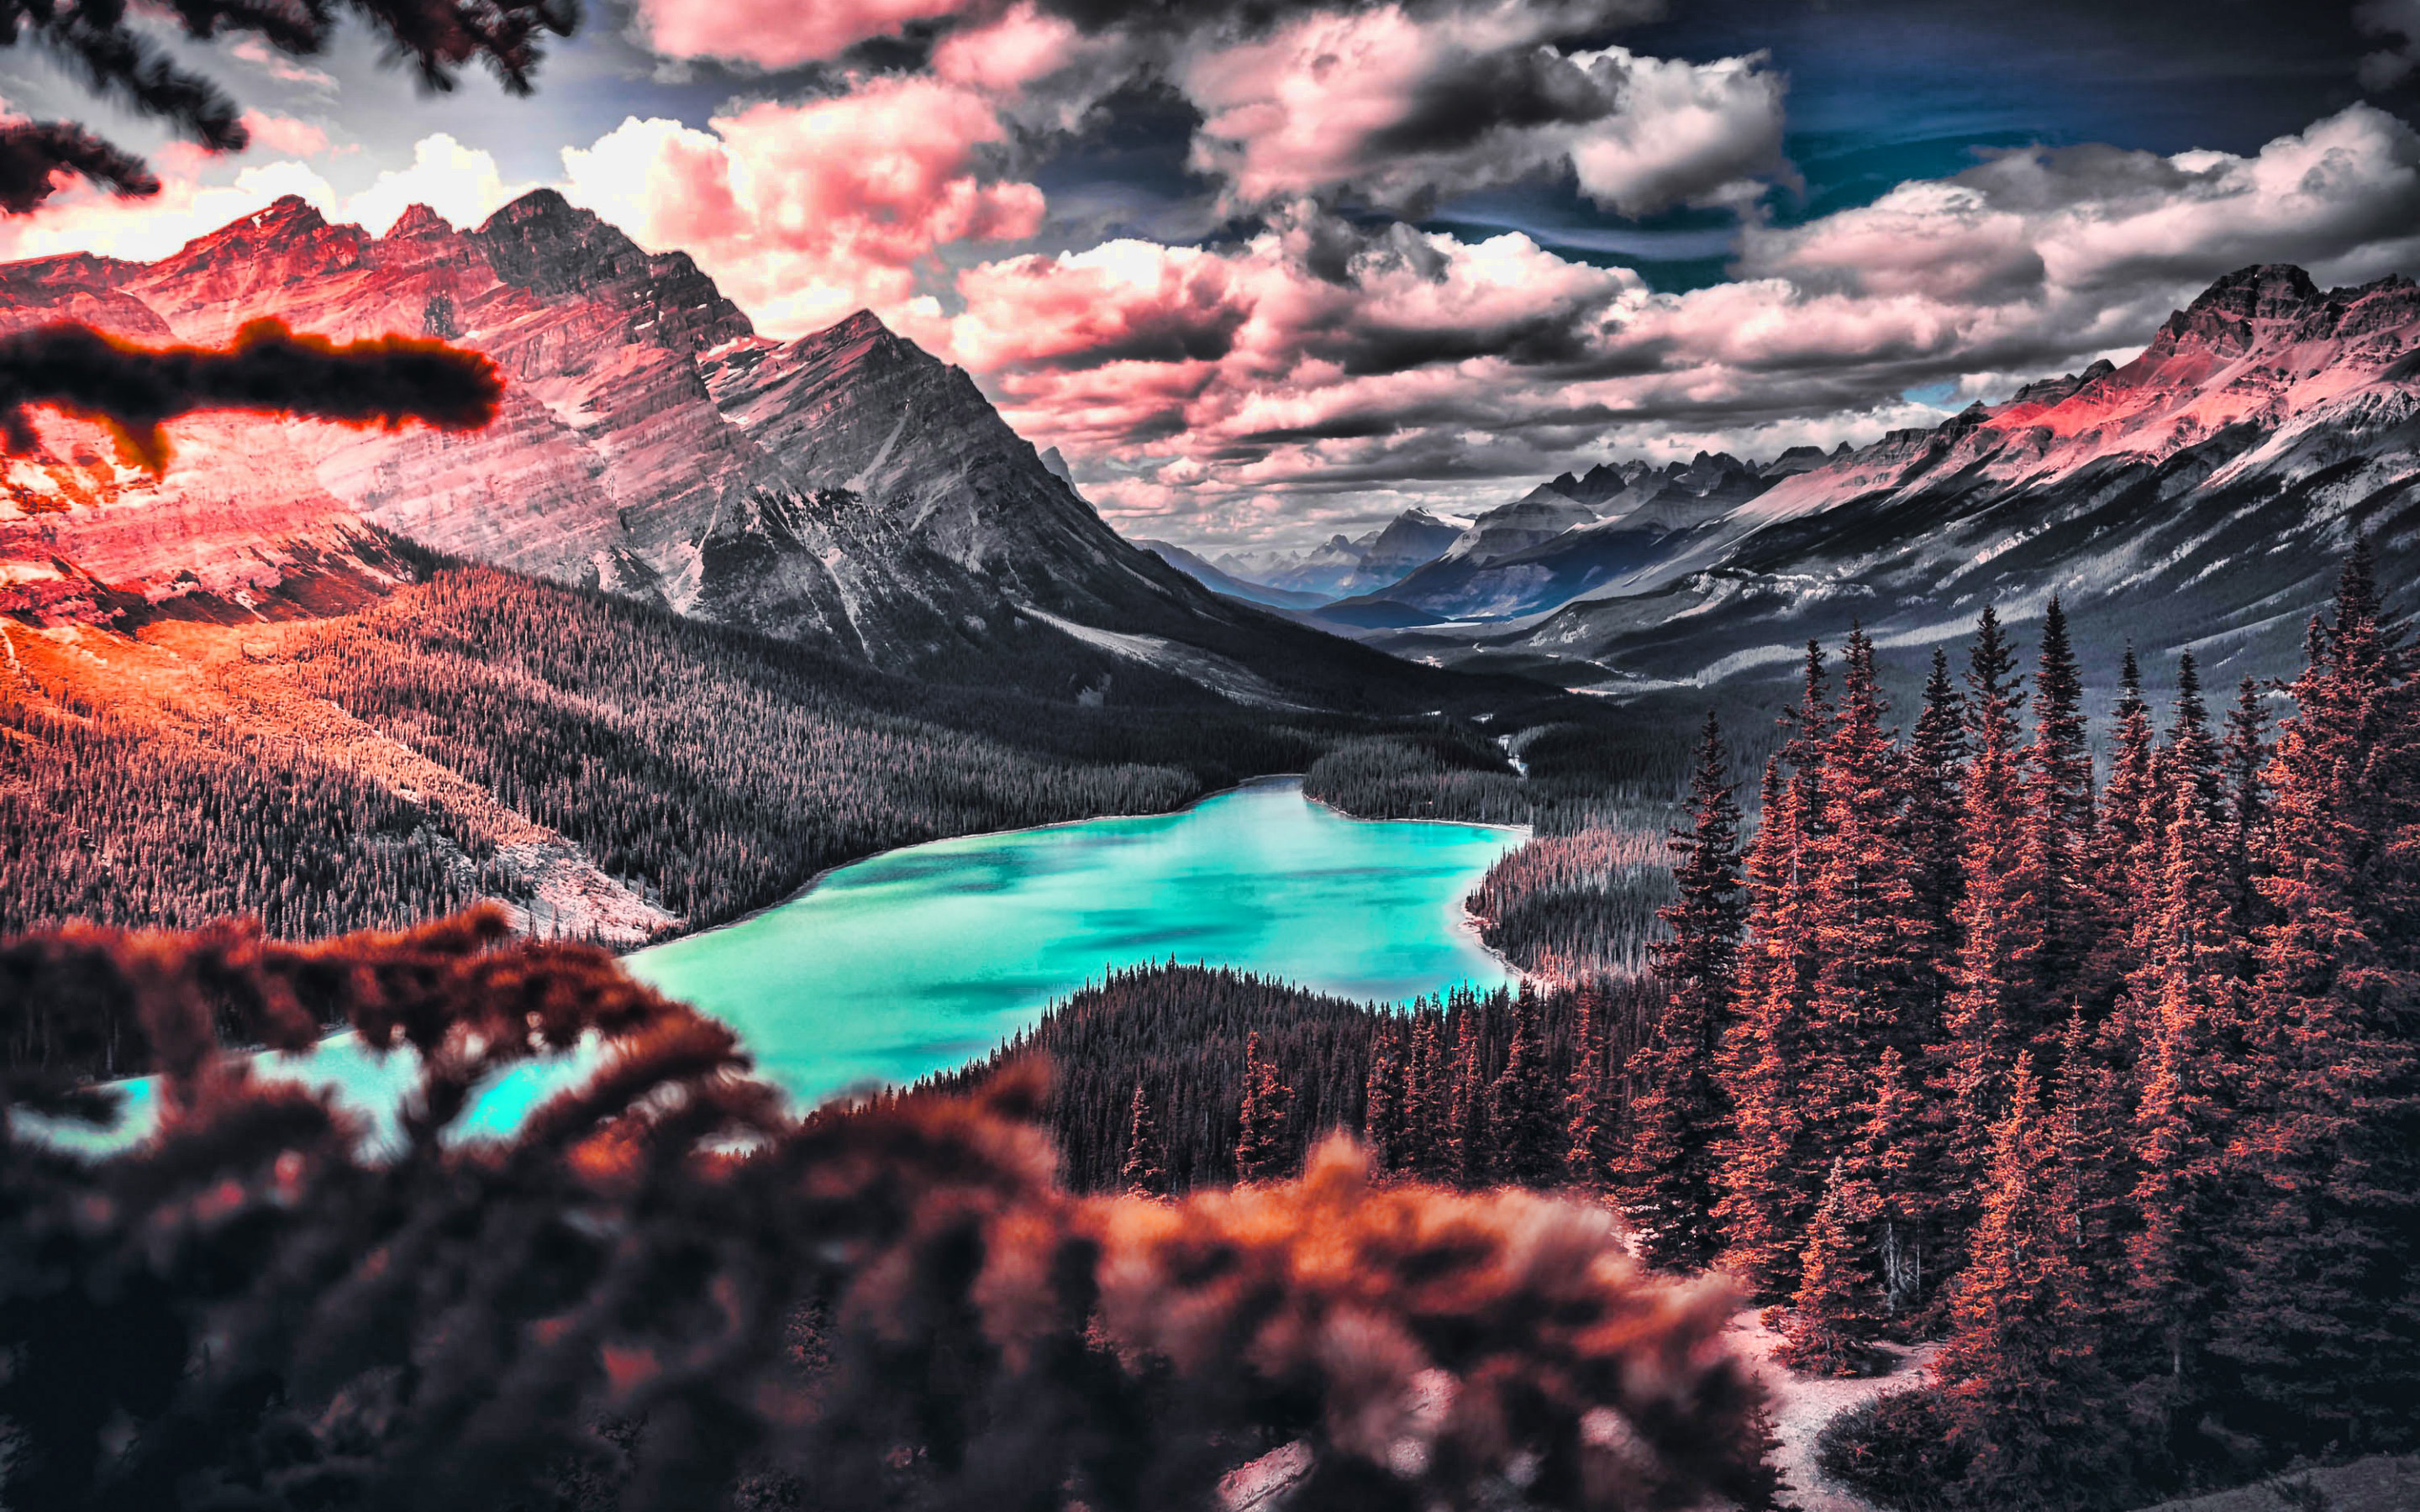 Download wallpaper Peyto Lake, HDR, autumn, Banff National Park, forest, Canadian Rockies, mountains, North America, Canada for desktop with resolution 2880x1800. High Quality HD picture wallpaper